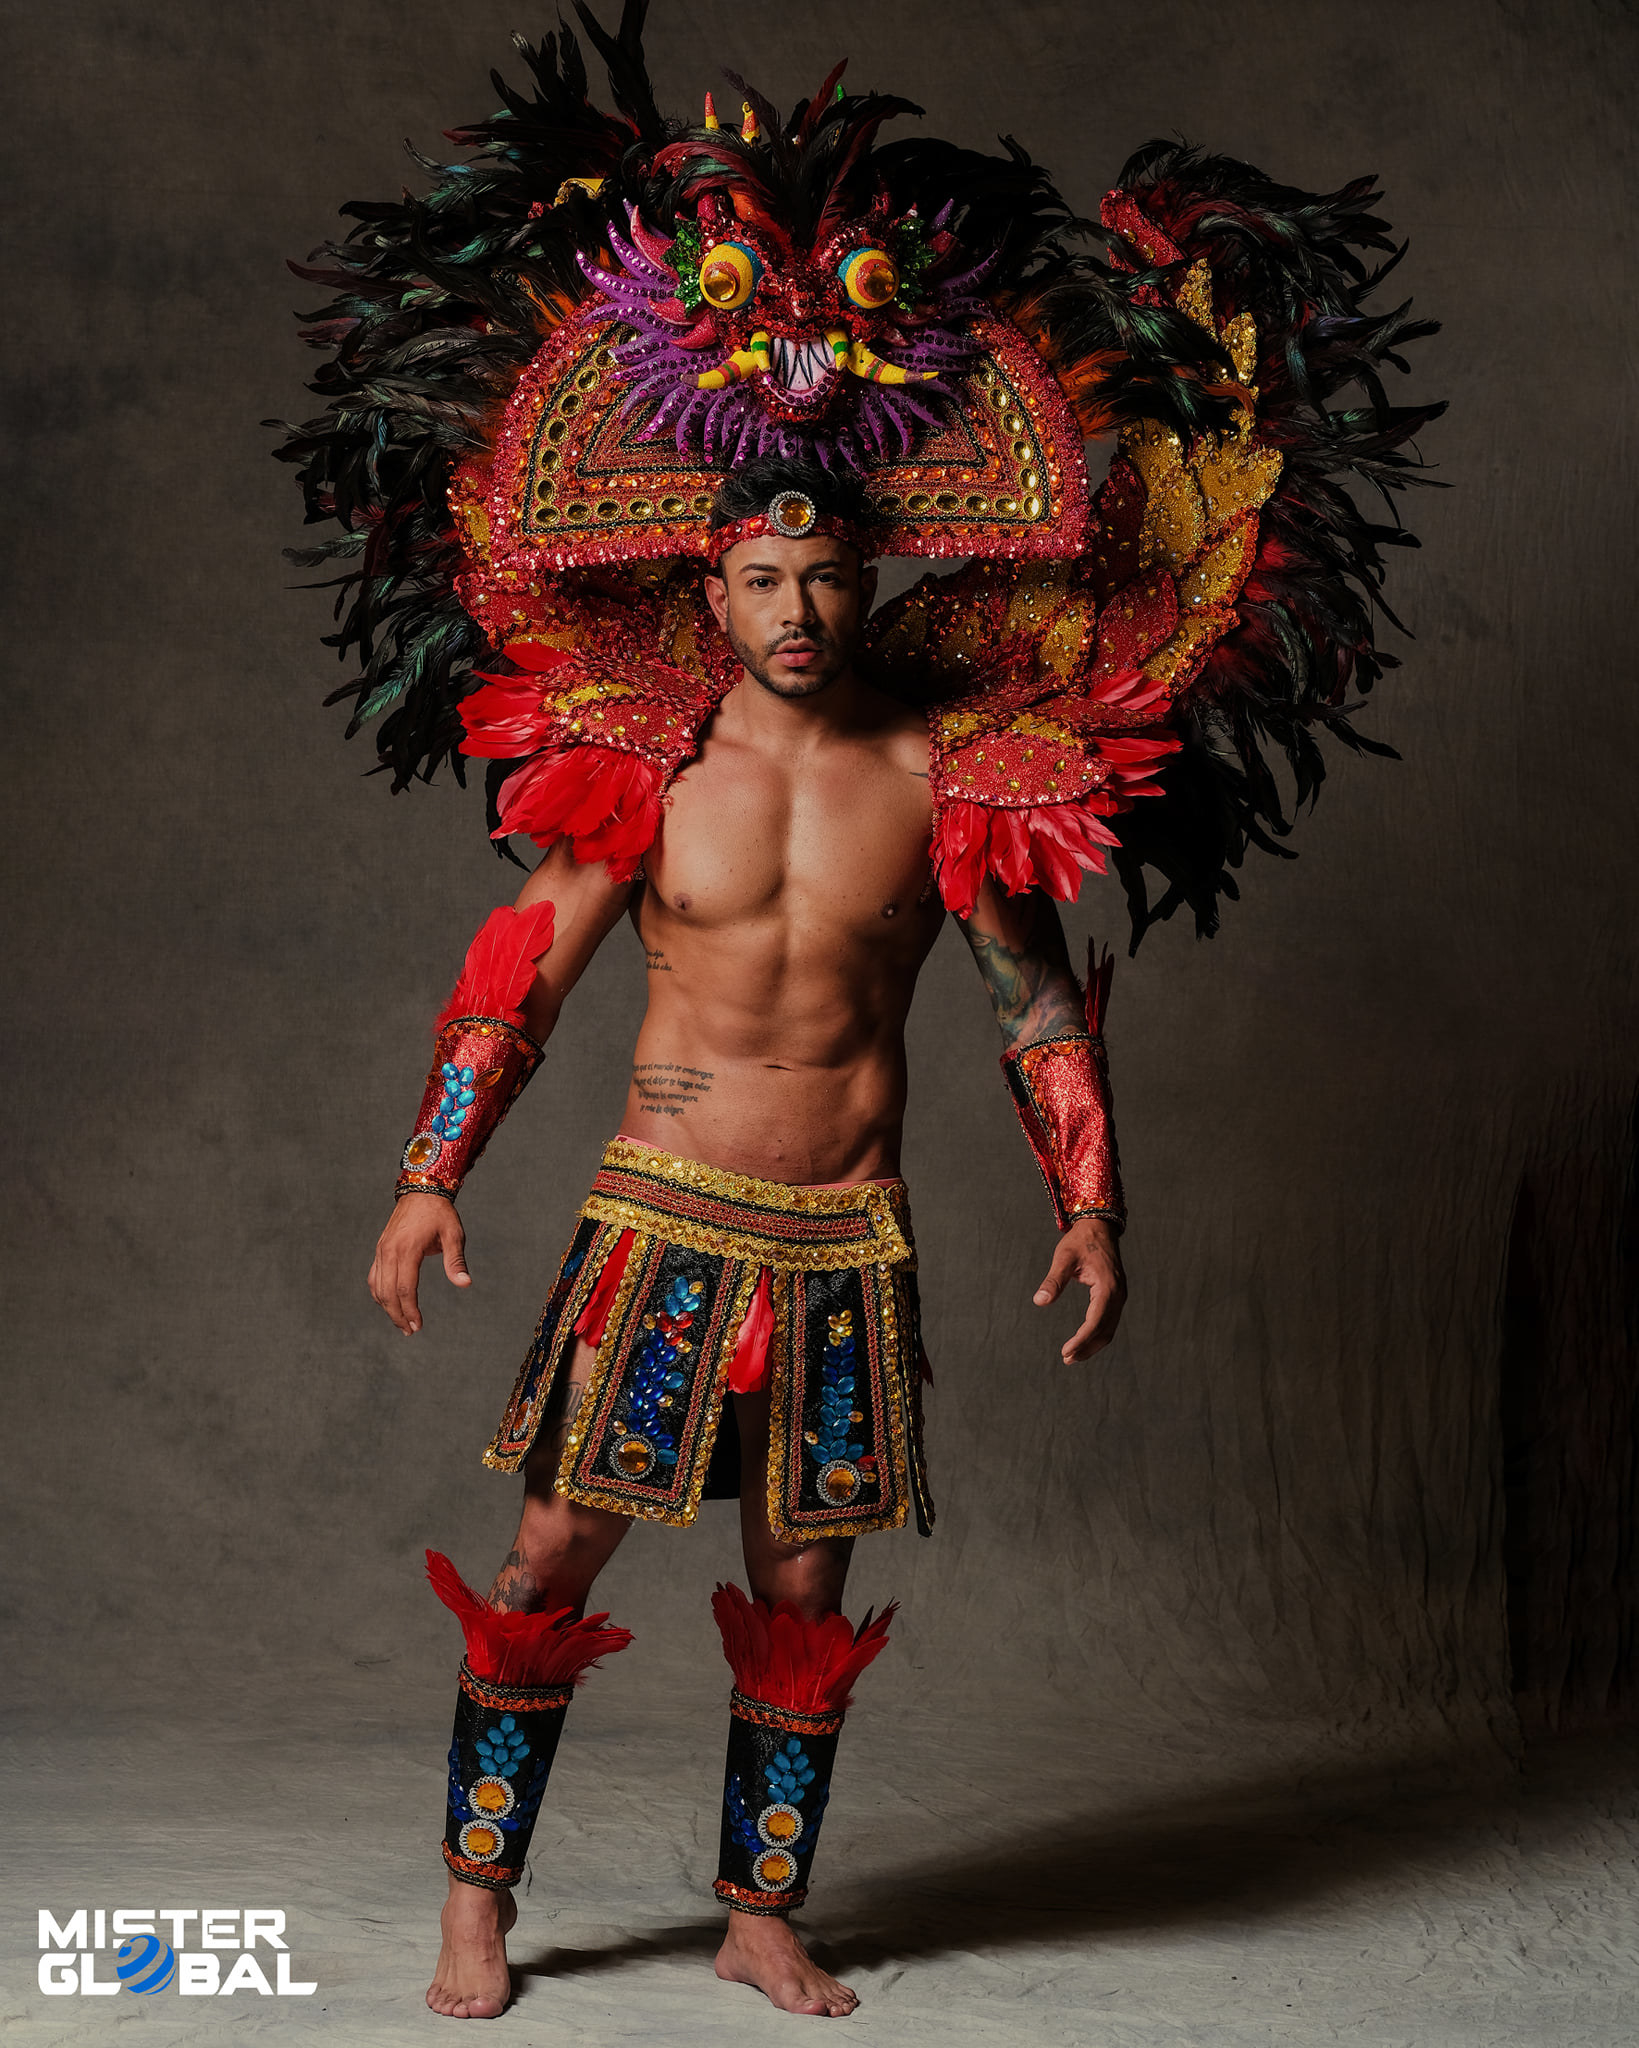 Bare-chested, barefoot man with large, ornate headdress and skirted, low-waisted, ornate loincloth